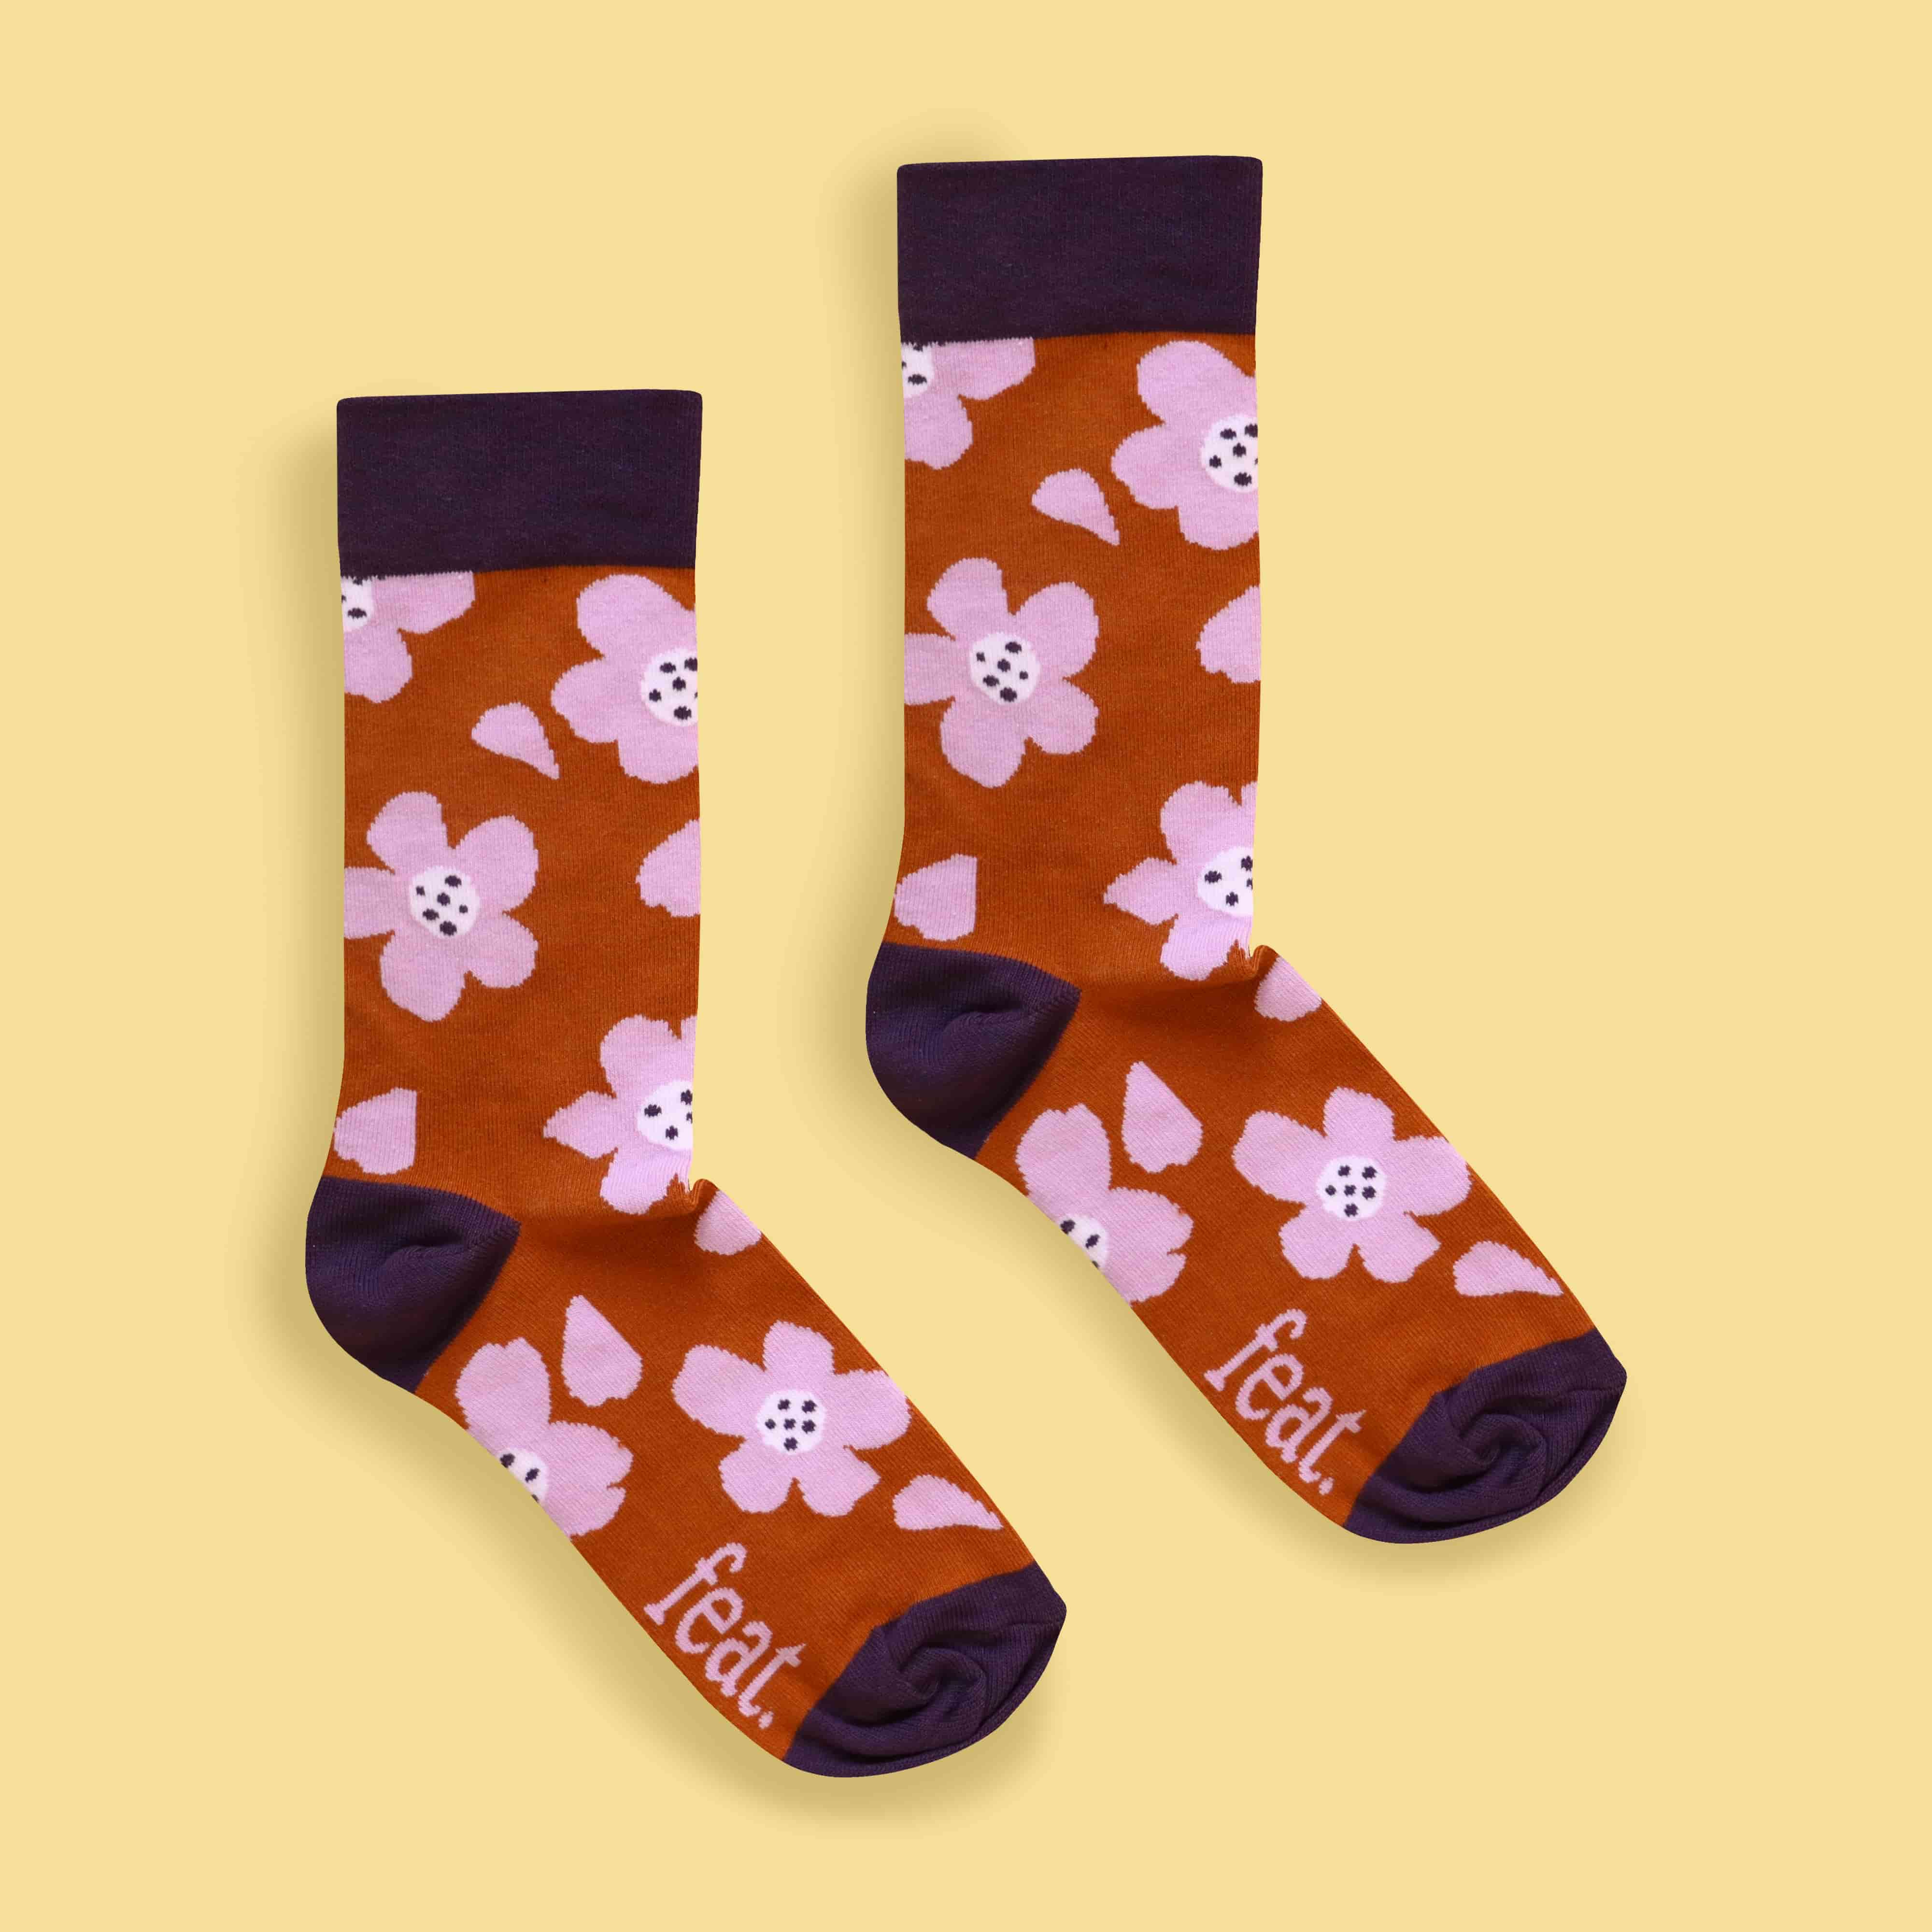 Rust and lilac floral socks centred image yellow background